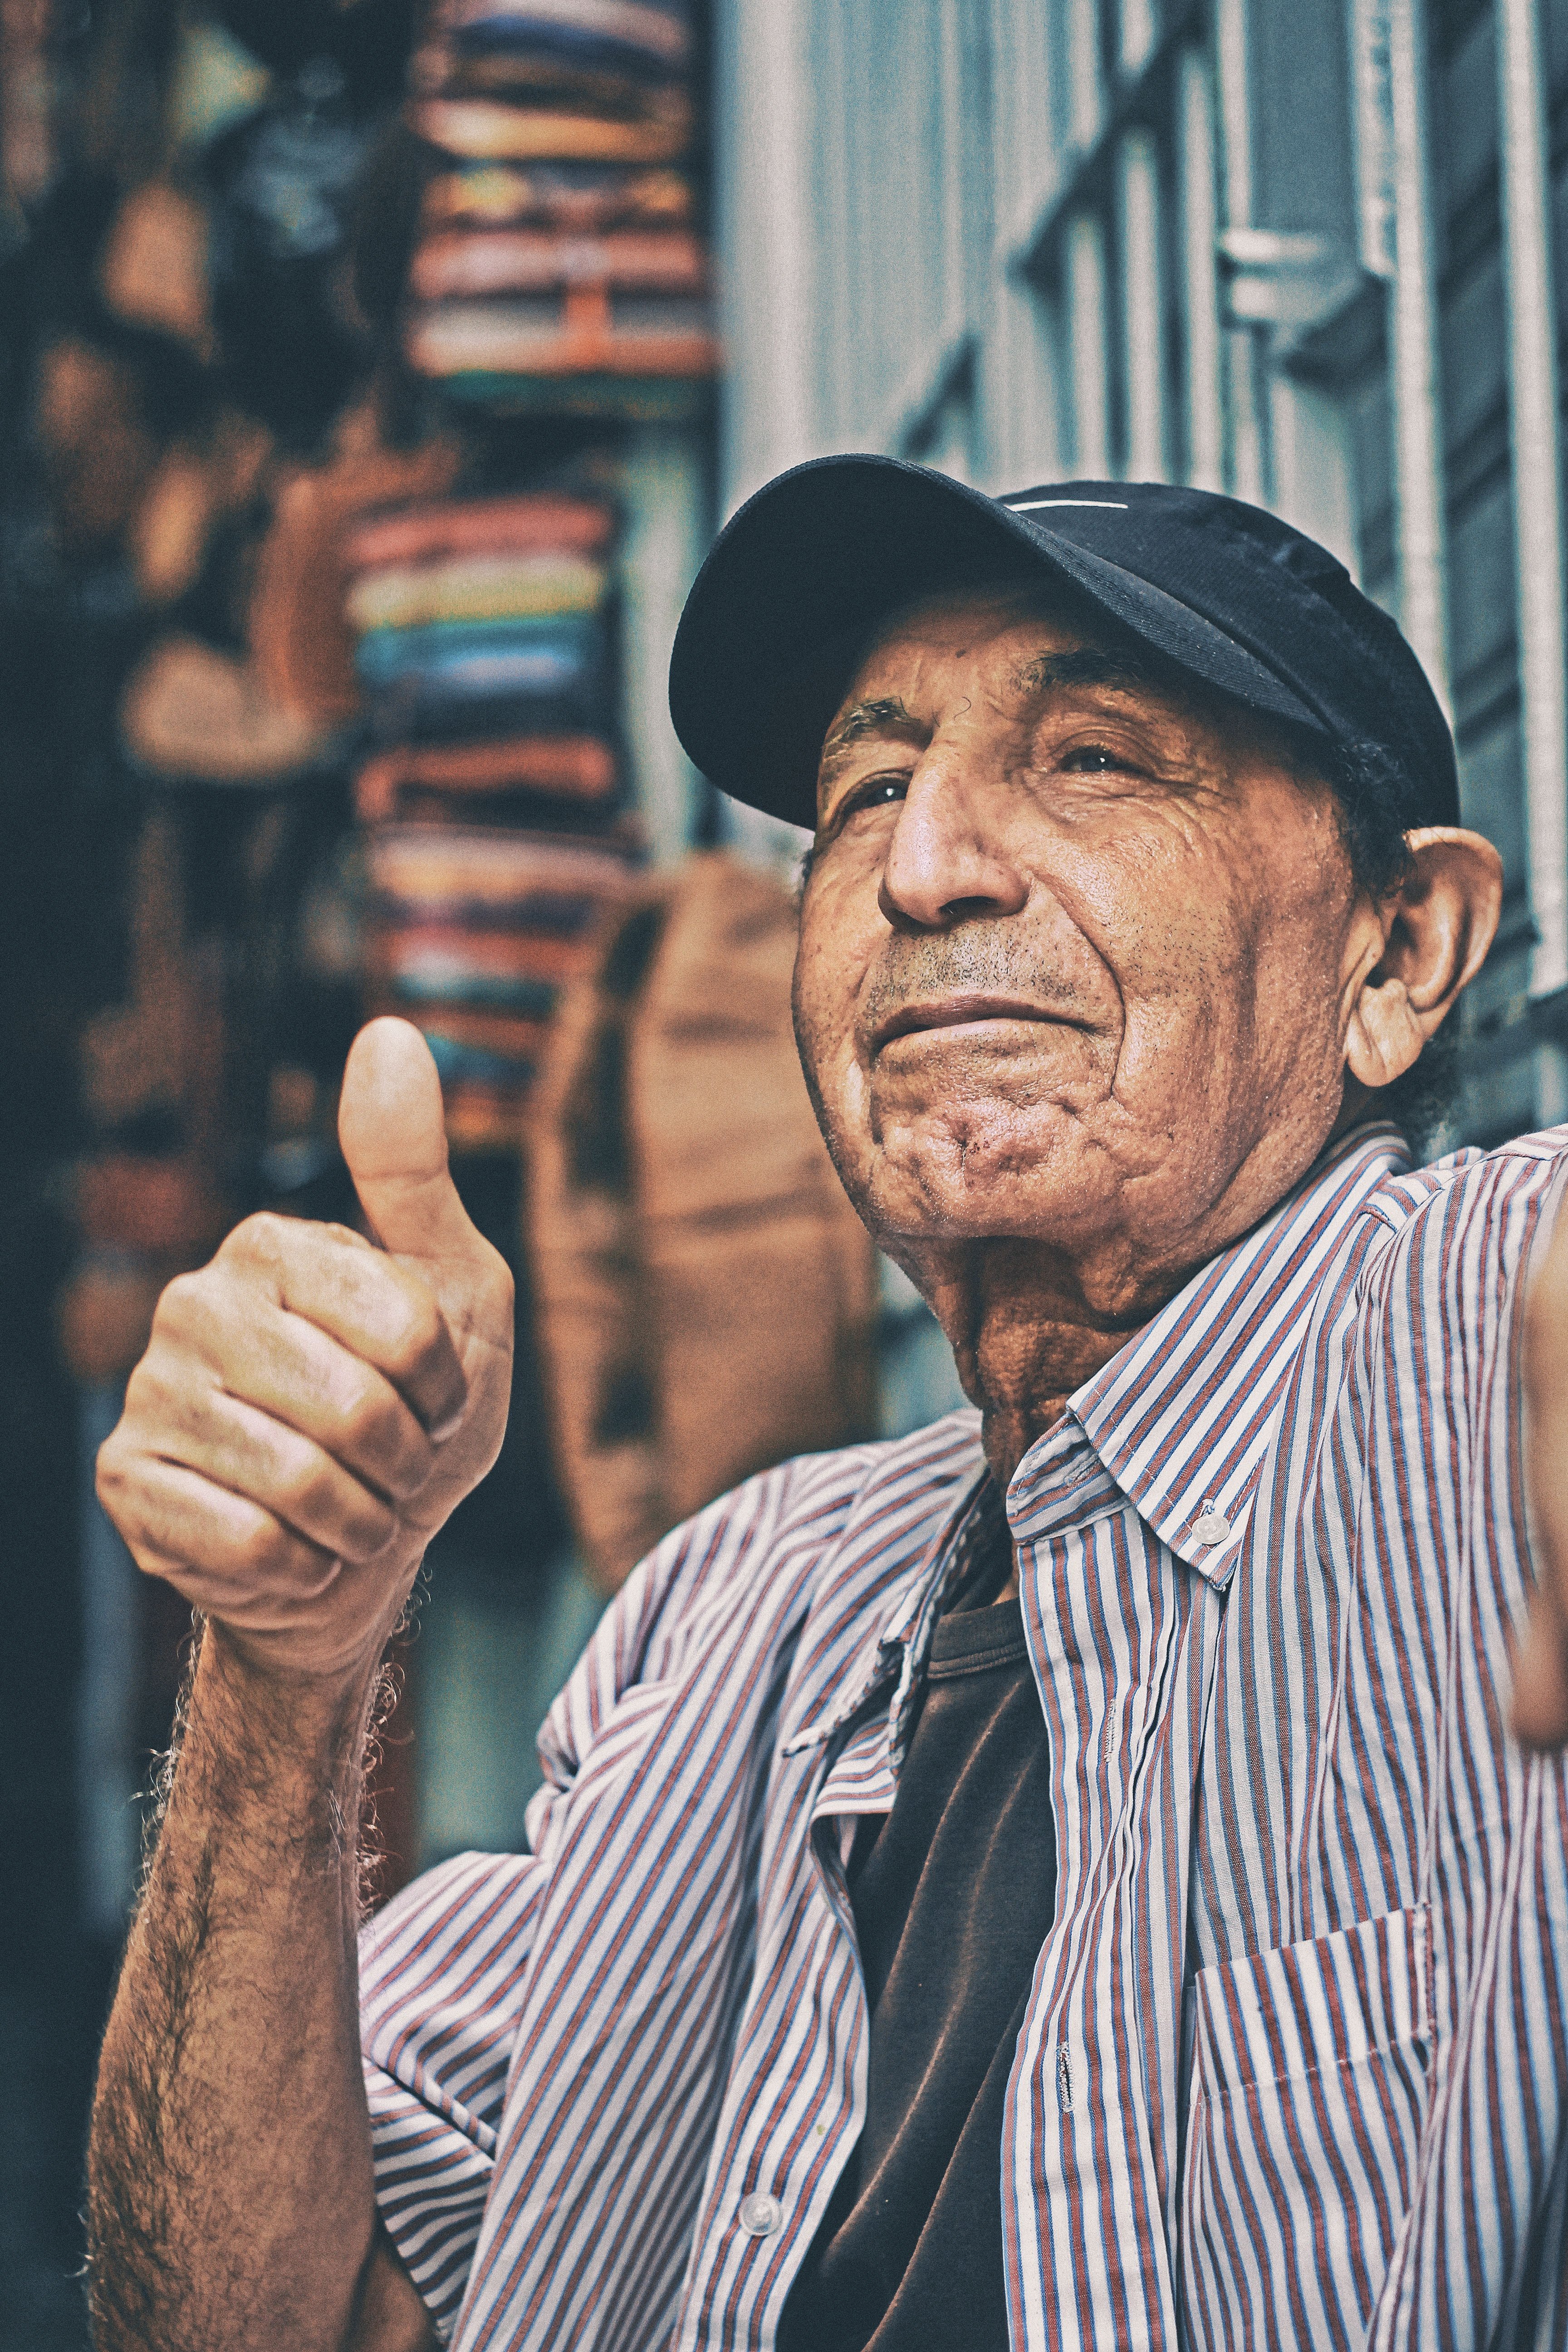 An old man giving a thumbs up. Source: Unsplash